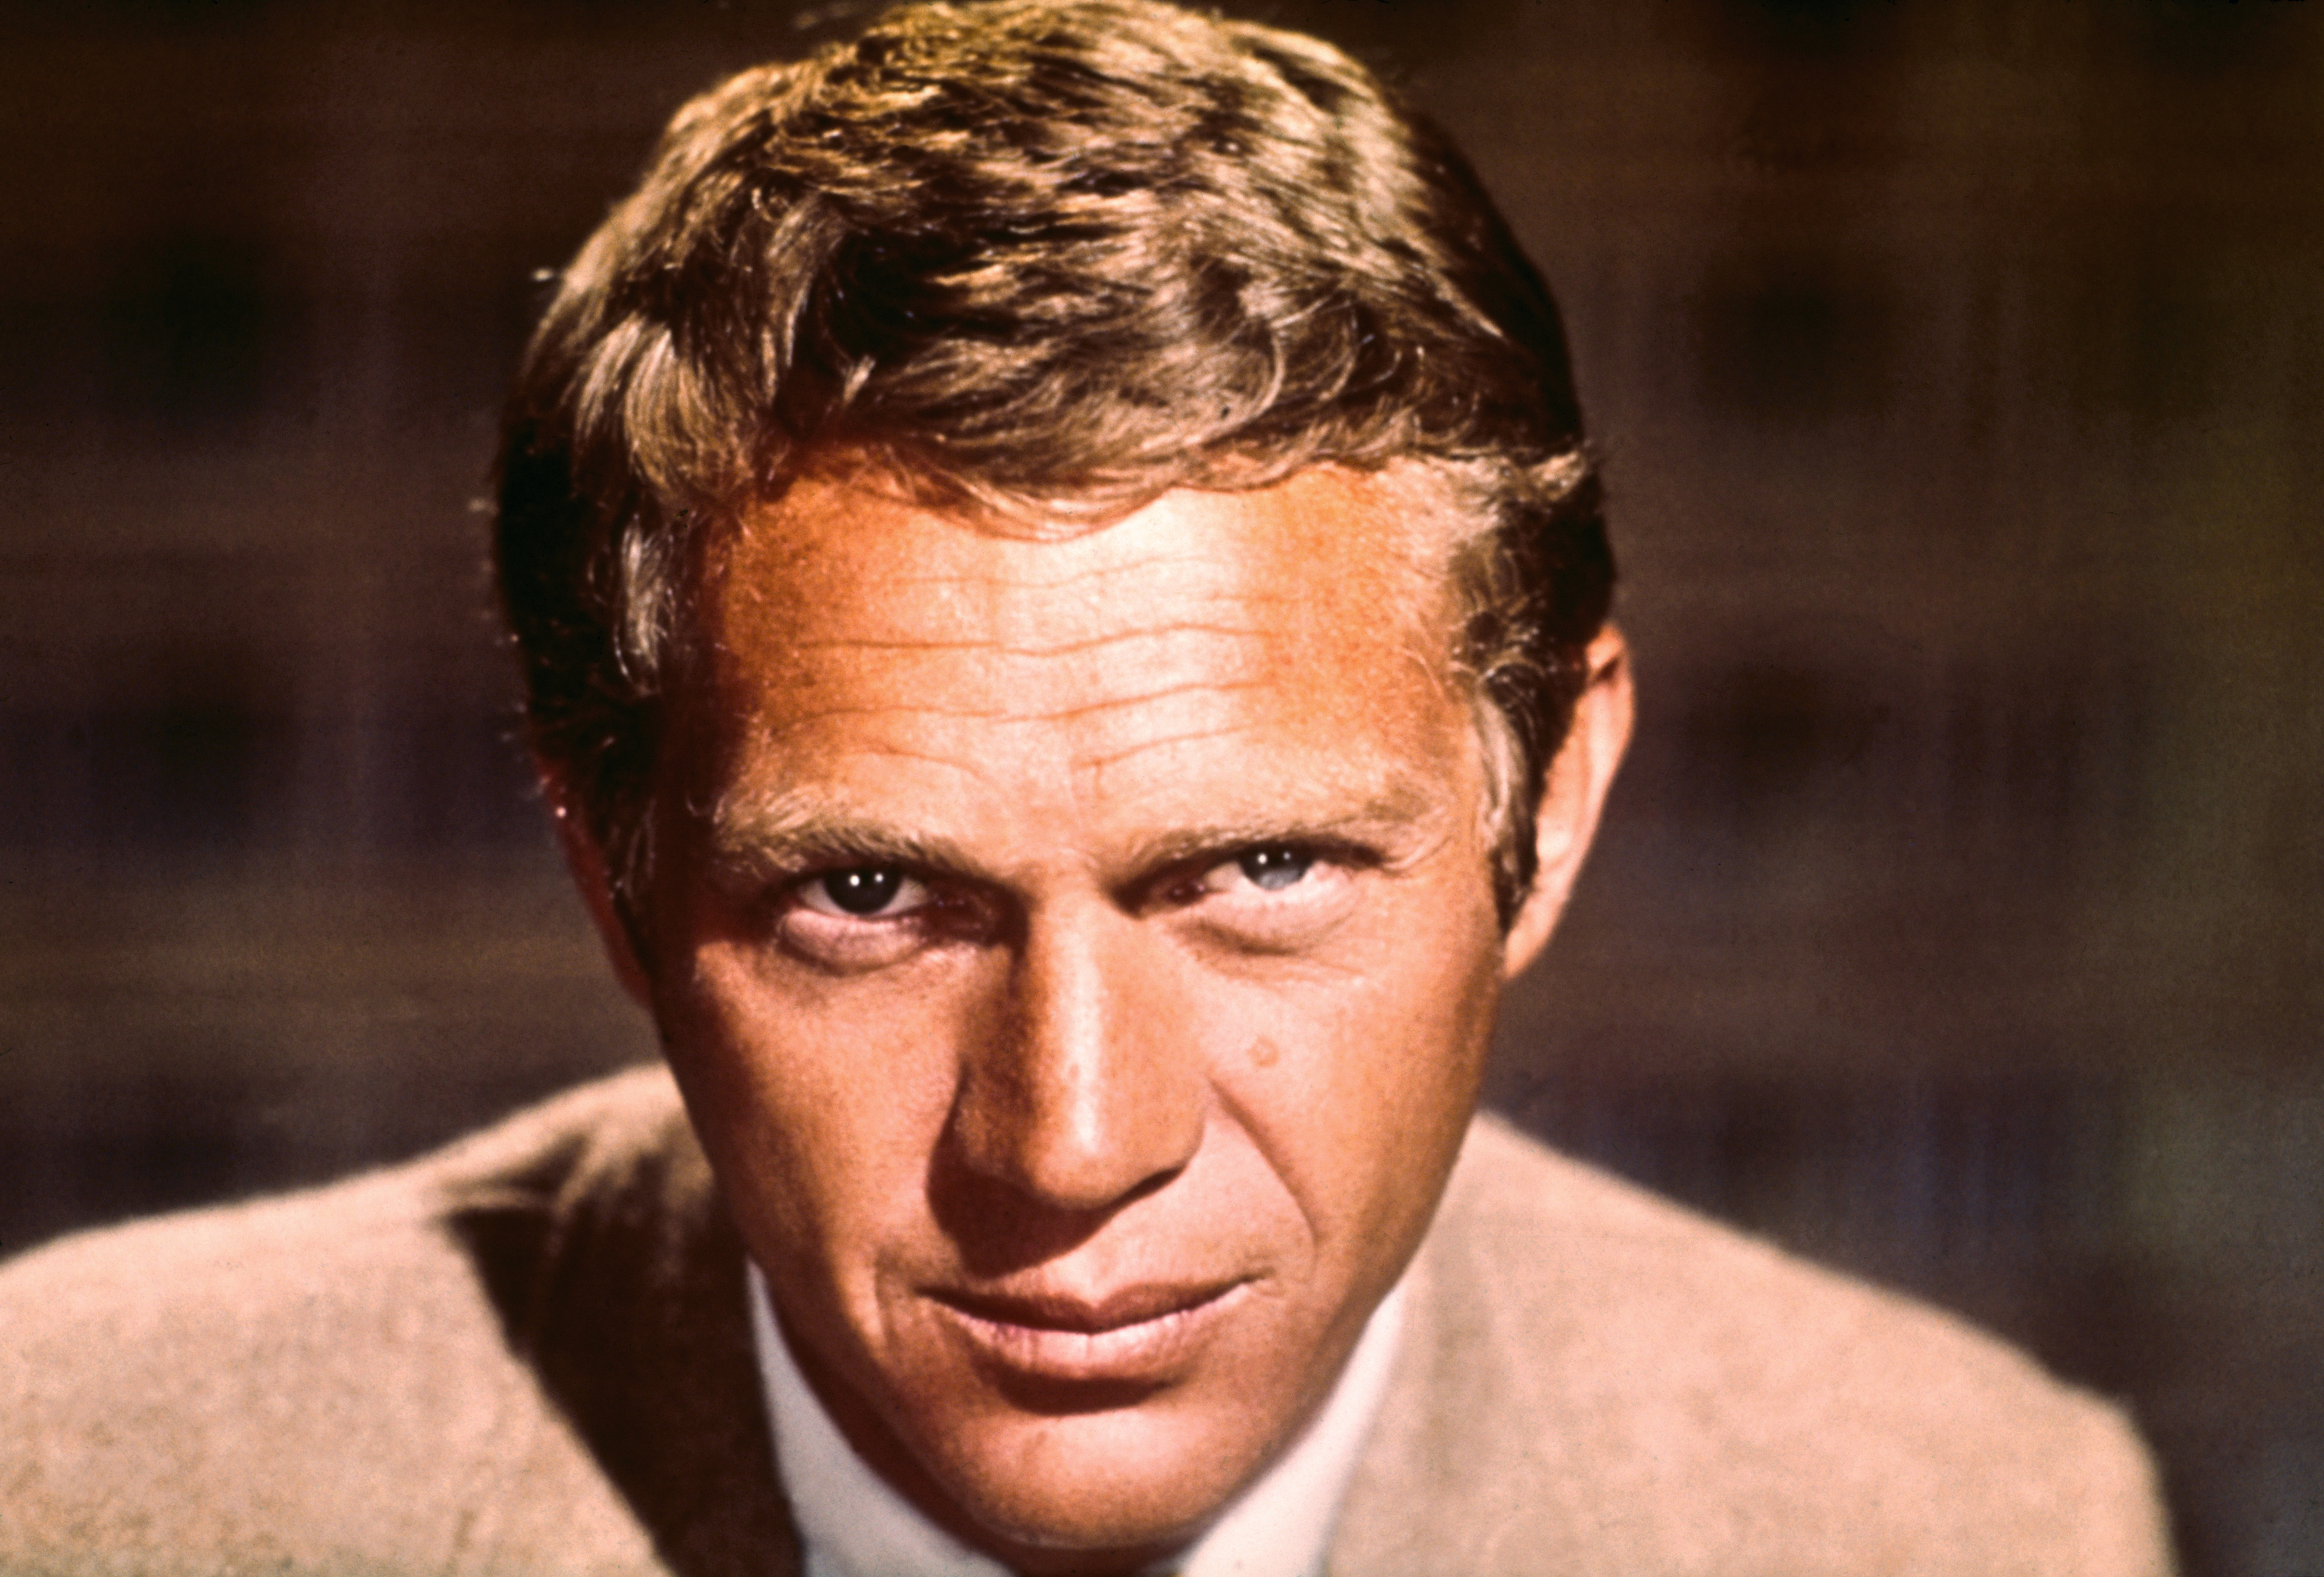 Steve McQueen close-up photo filed on March 1966 | Source: Getty Images